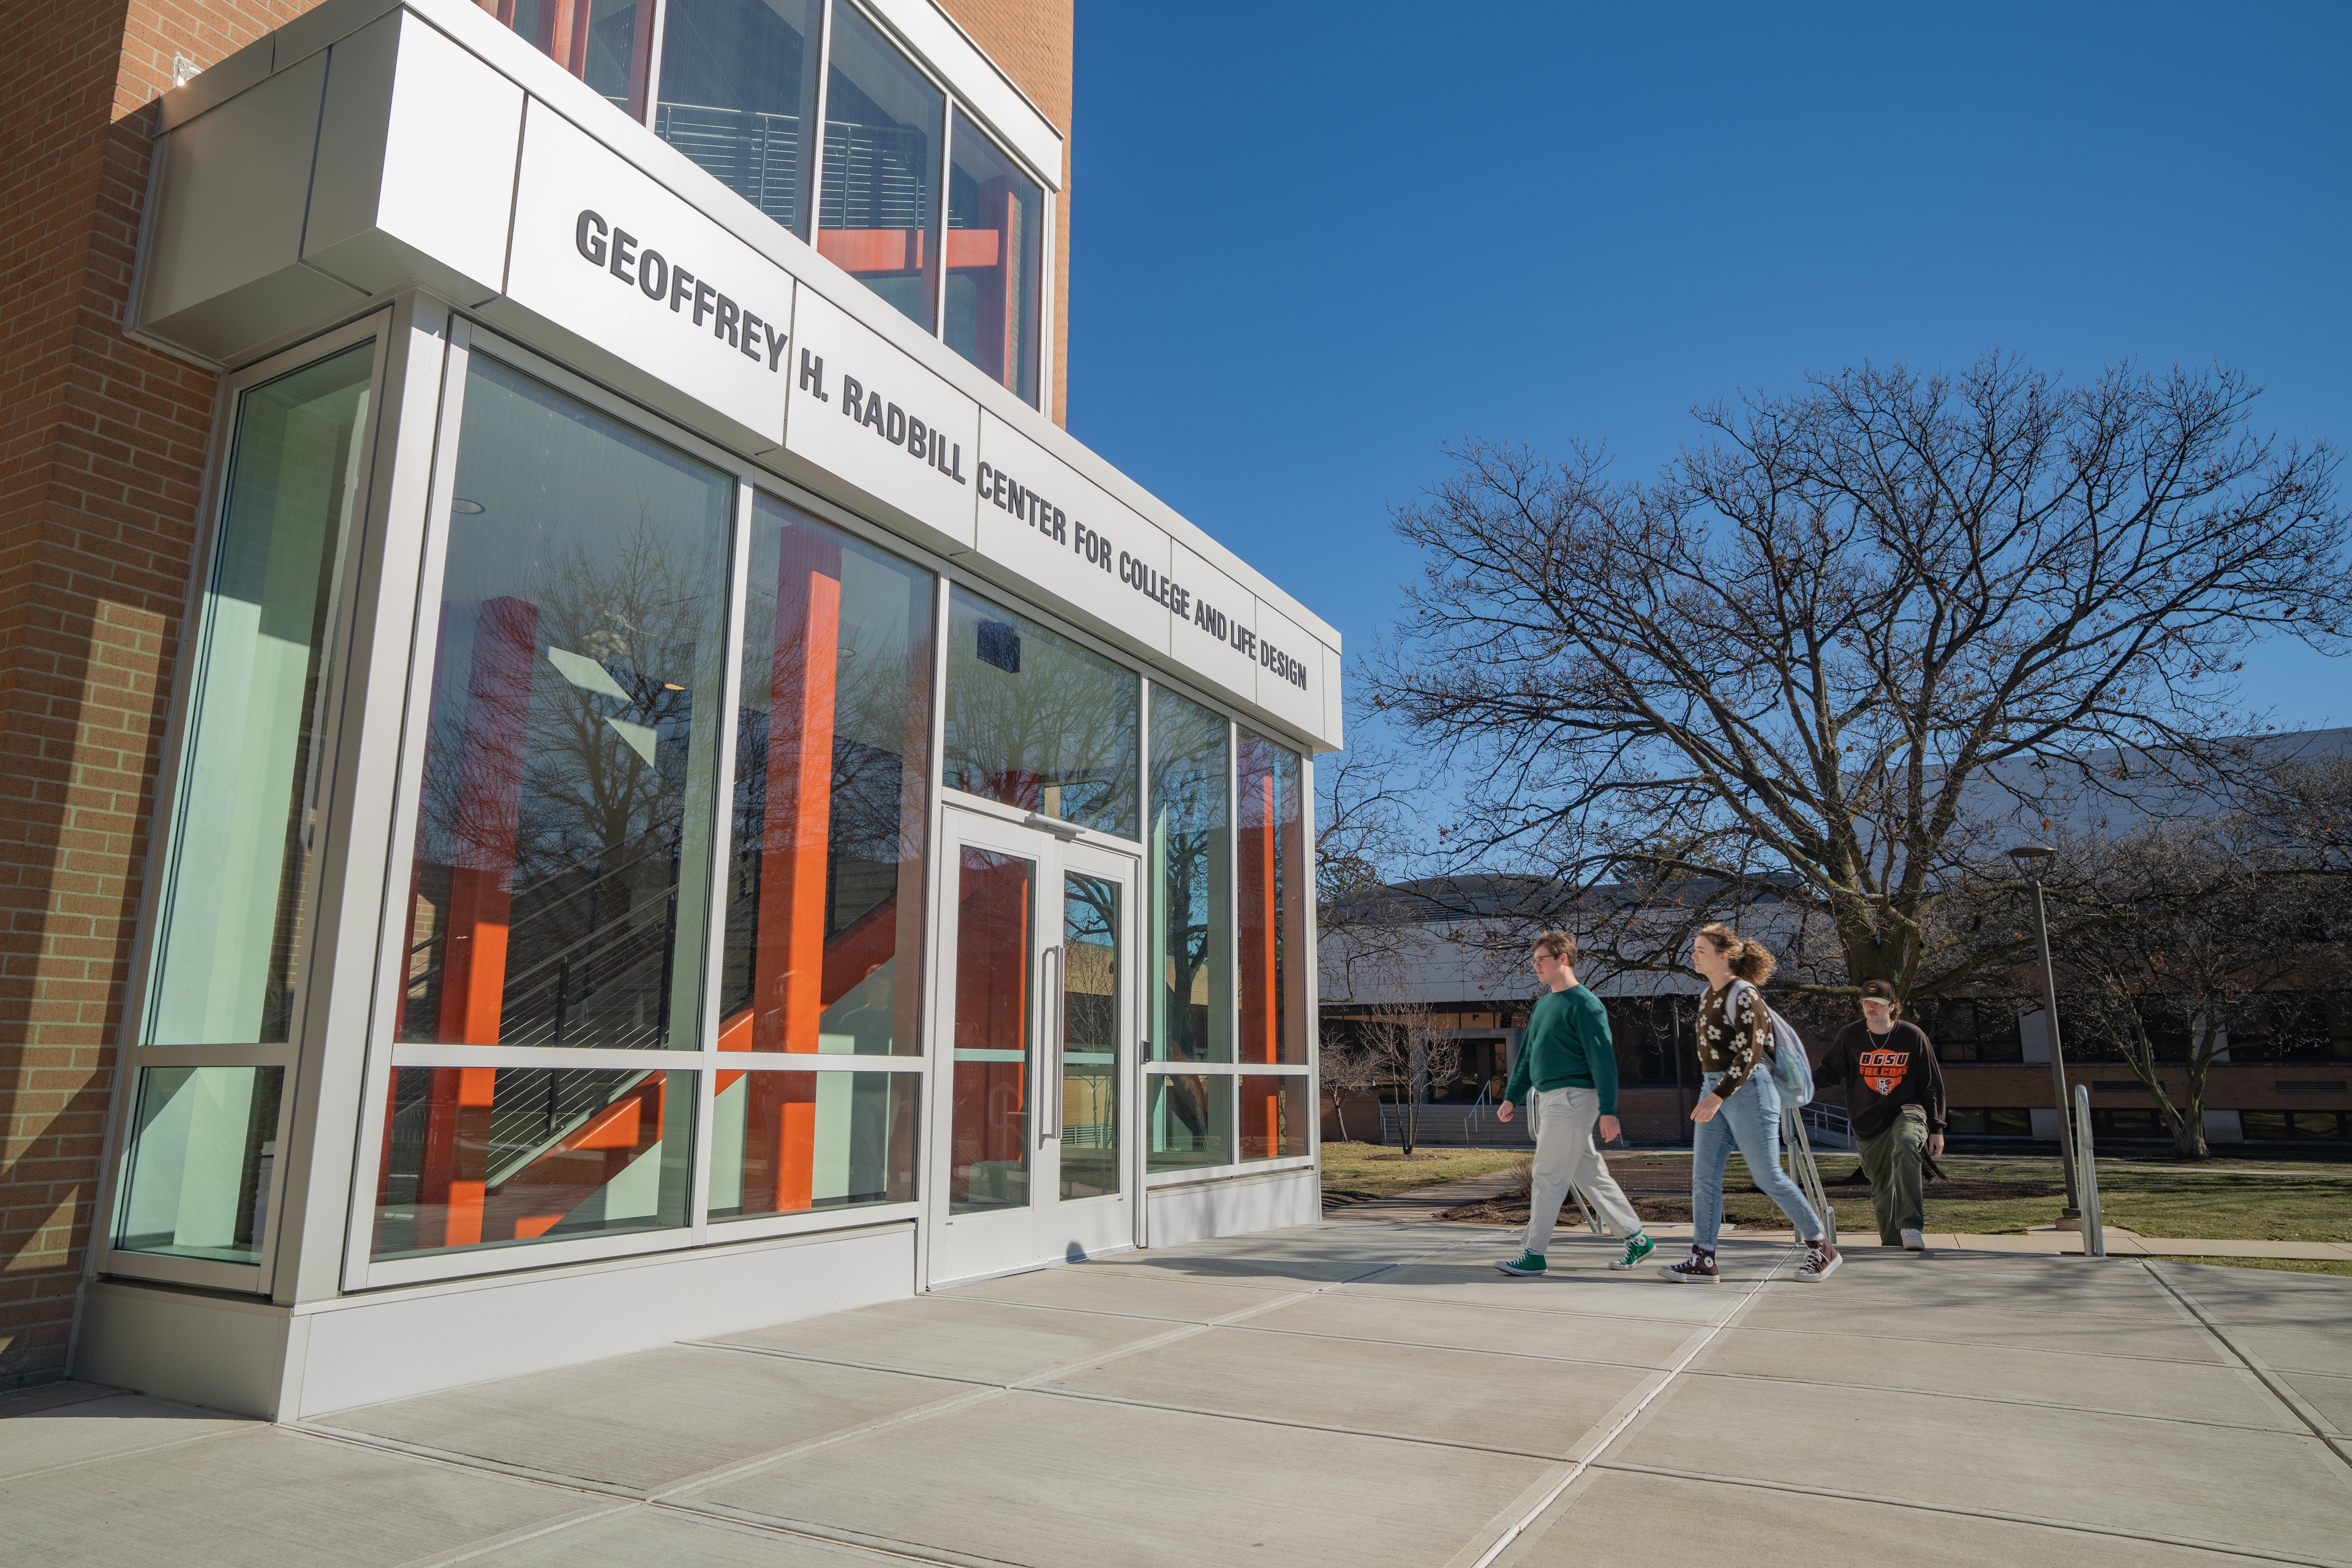 The exterior entrance to the Geoffrey H. Radbill Center for College and Life Design on the BGSU campus.